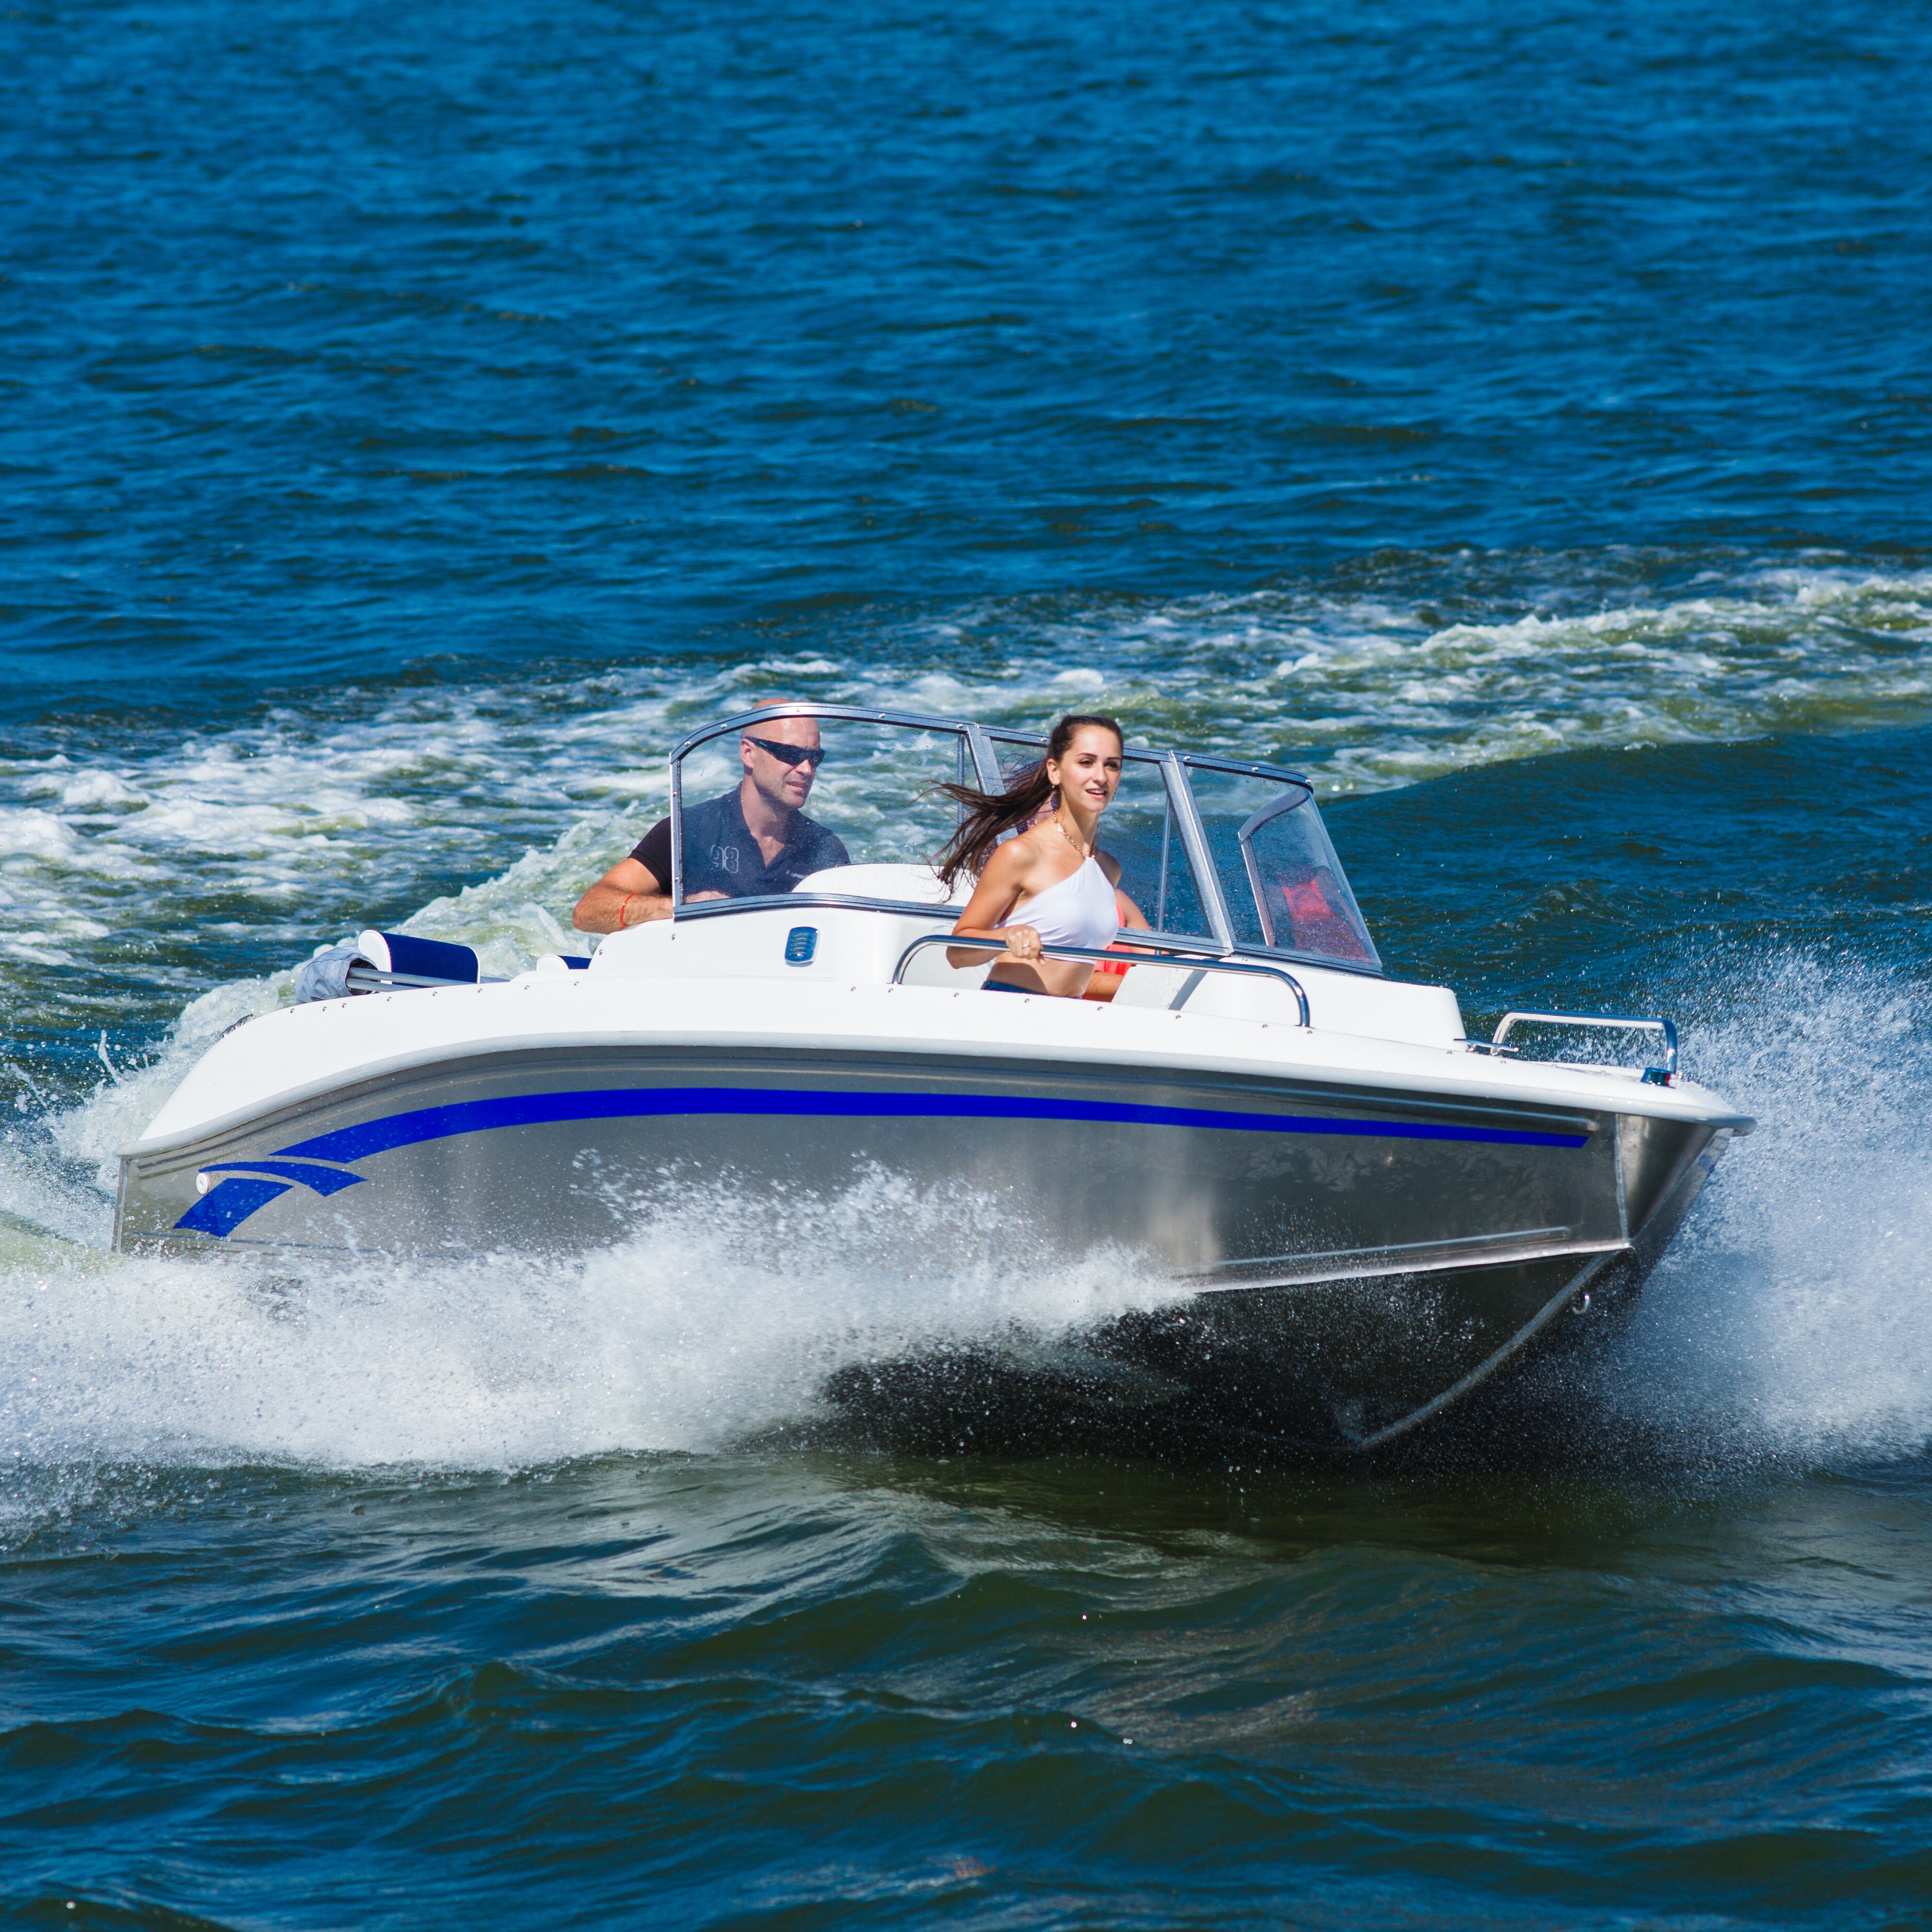 AAA insurance shares boating safety tips